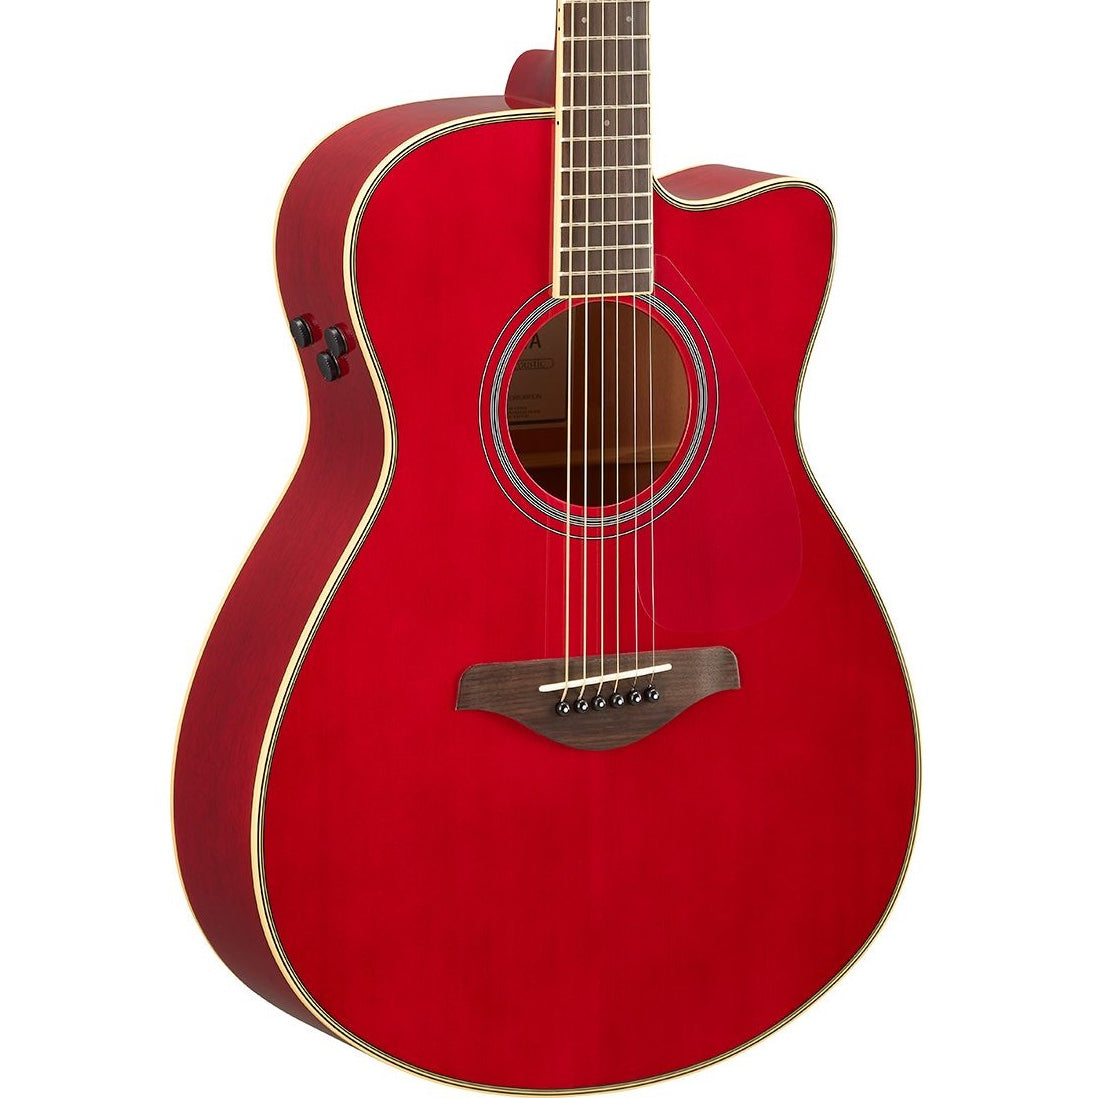 Yamaha FSC-TA TransAcoustic Concert Ruby Red | Music Experience | Shop Online | South Africa